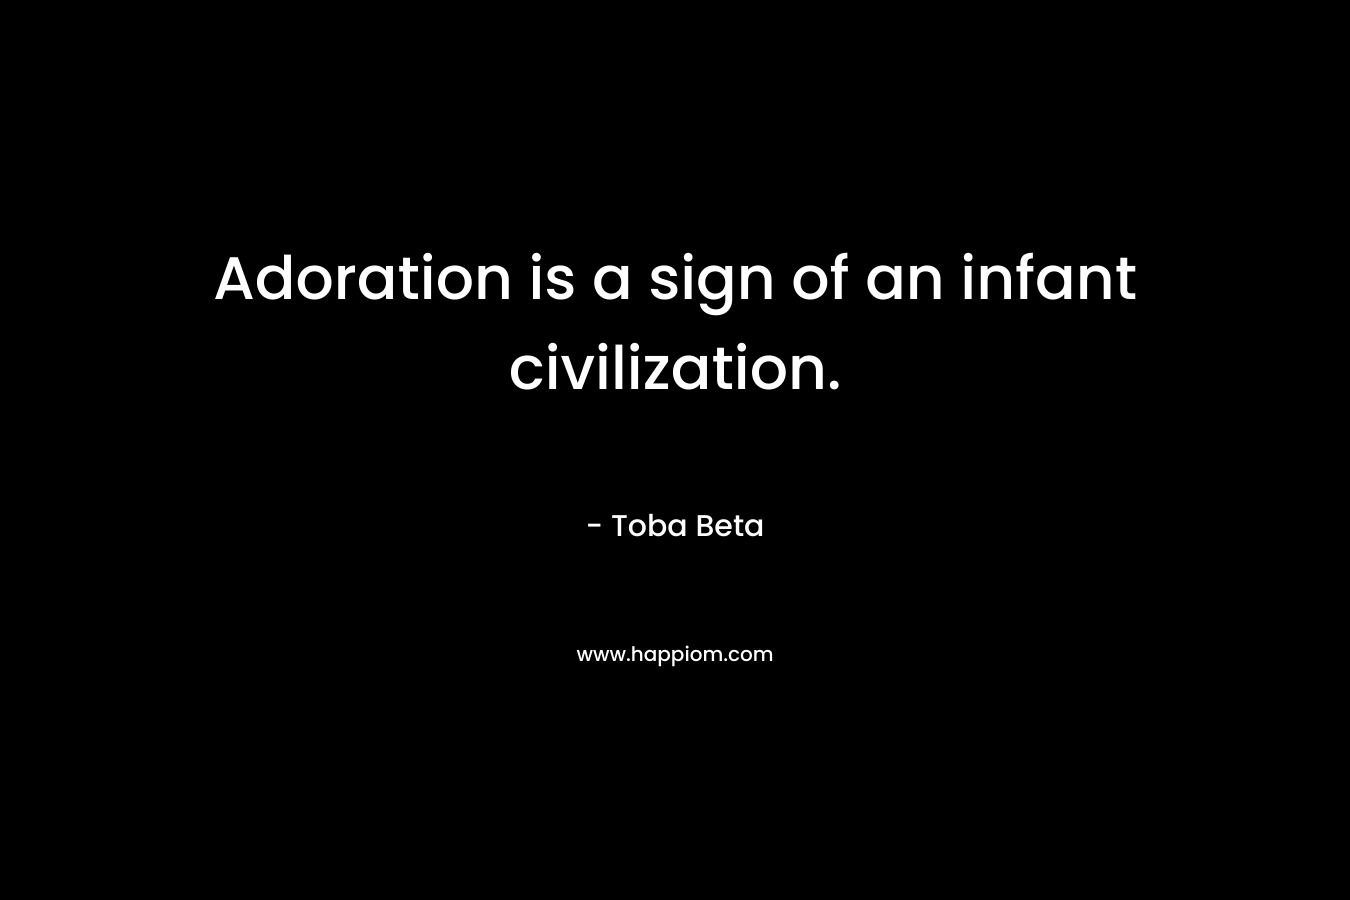 Adoration is a sign of an infant civilization. – Toba Beta